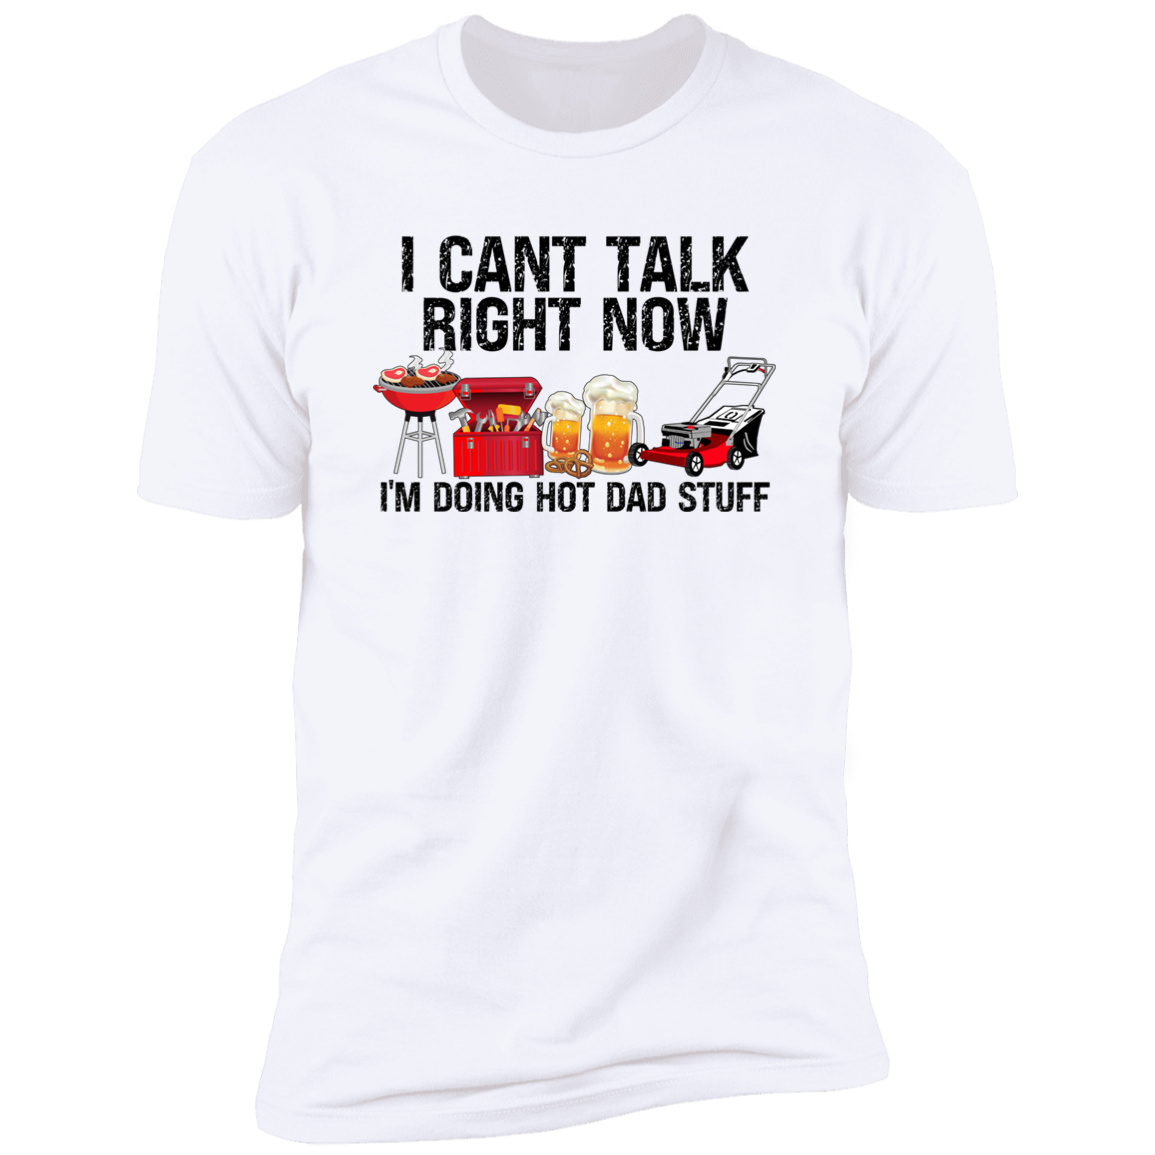 I CAN'T TALK RIGHT NOW T-SHIRT